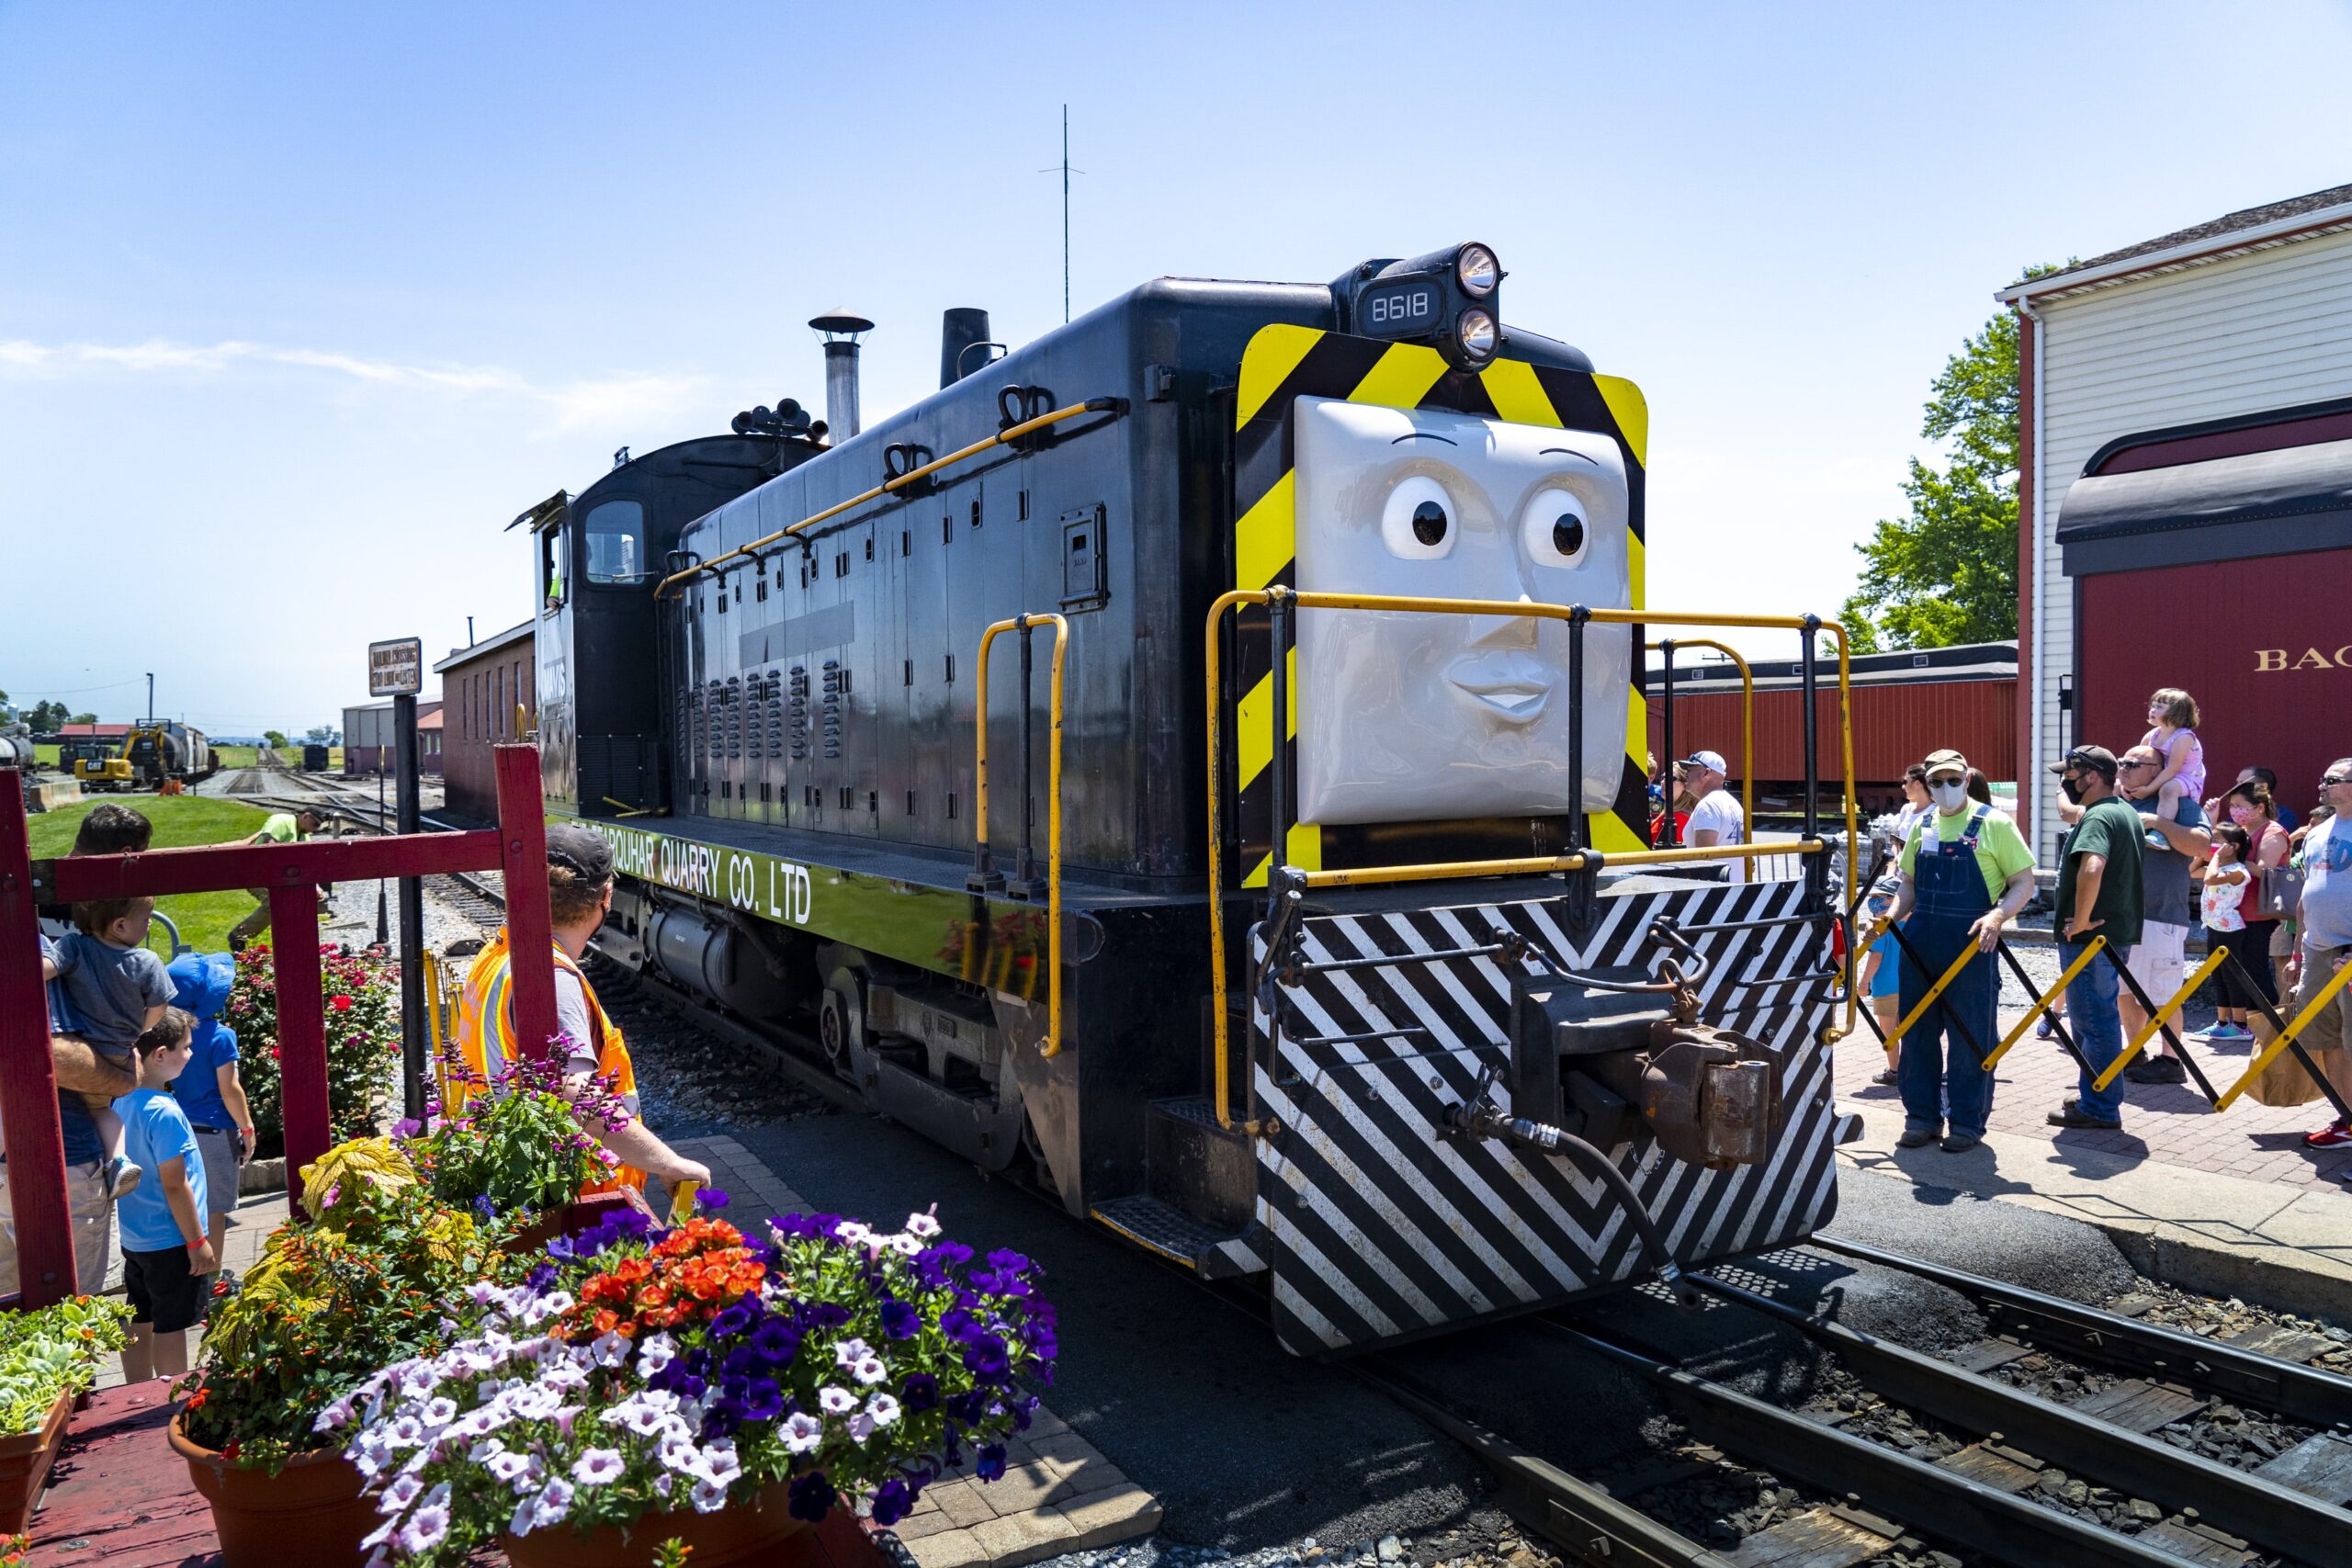 A group of people standing next to Mavis the train.